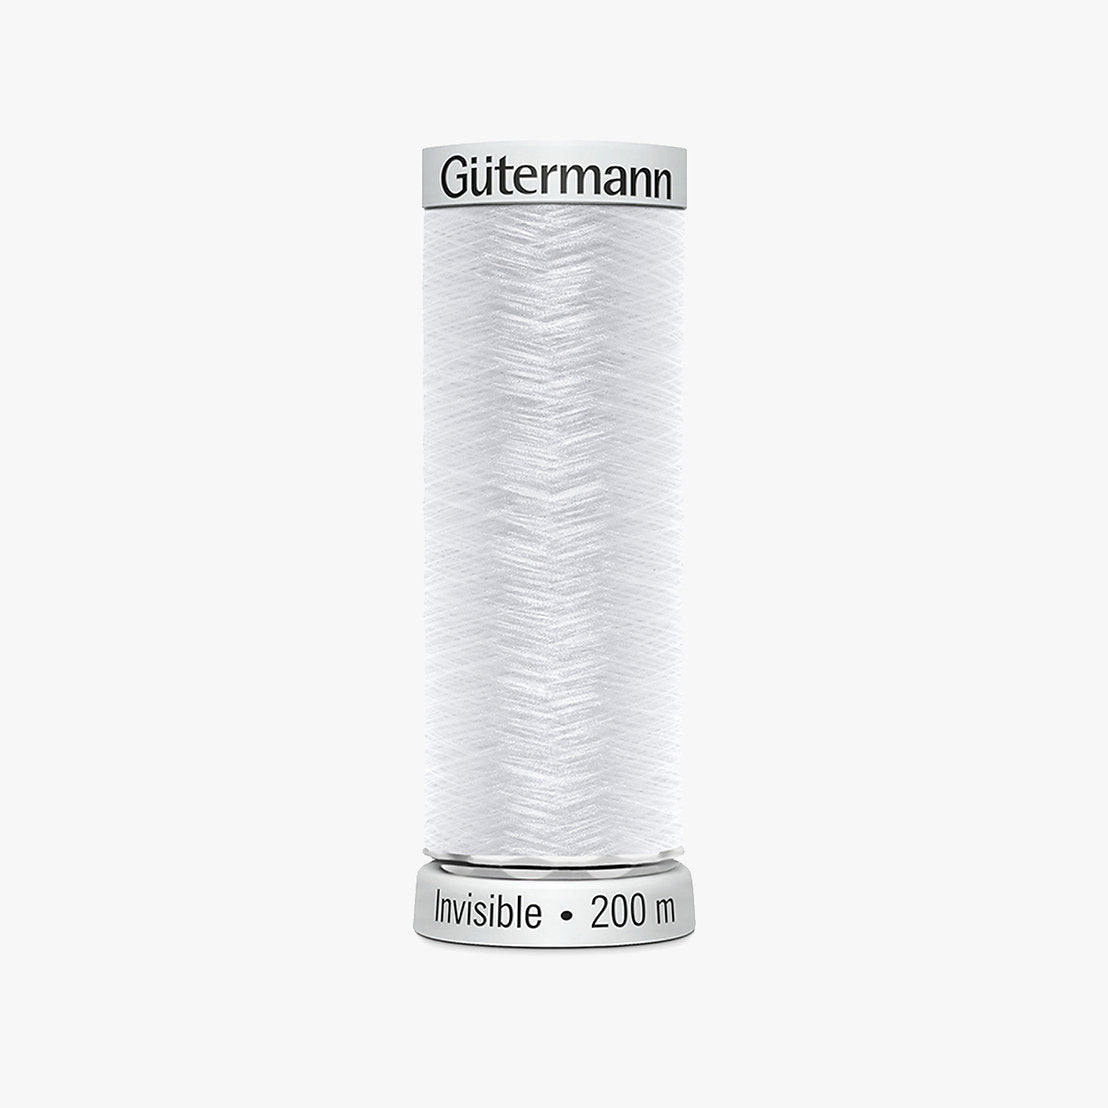 High-quality invisible thread from Gütermann for hand or machine sewin